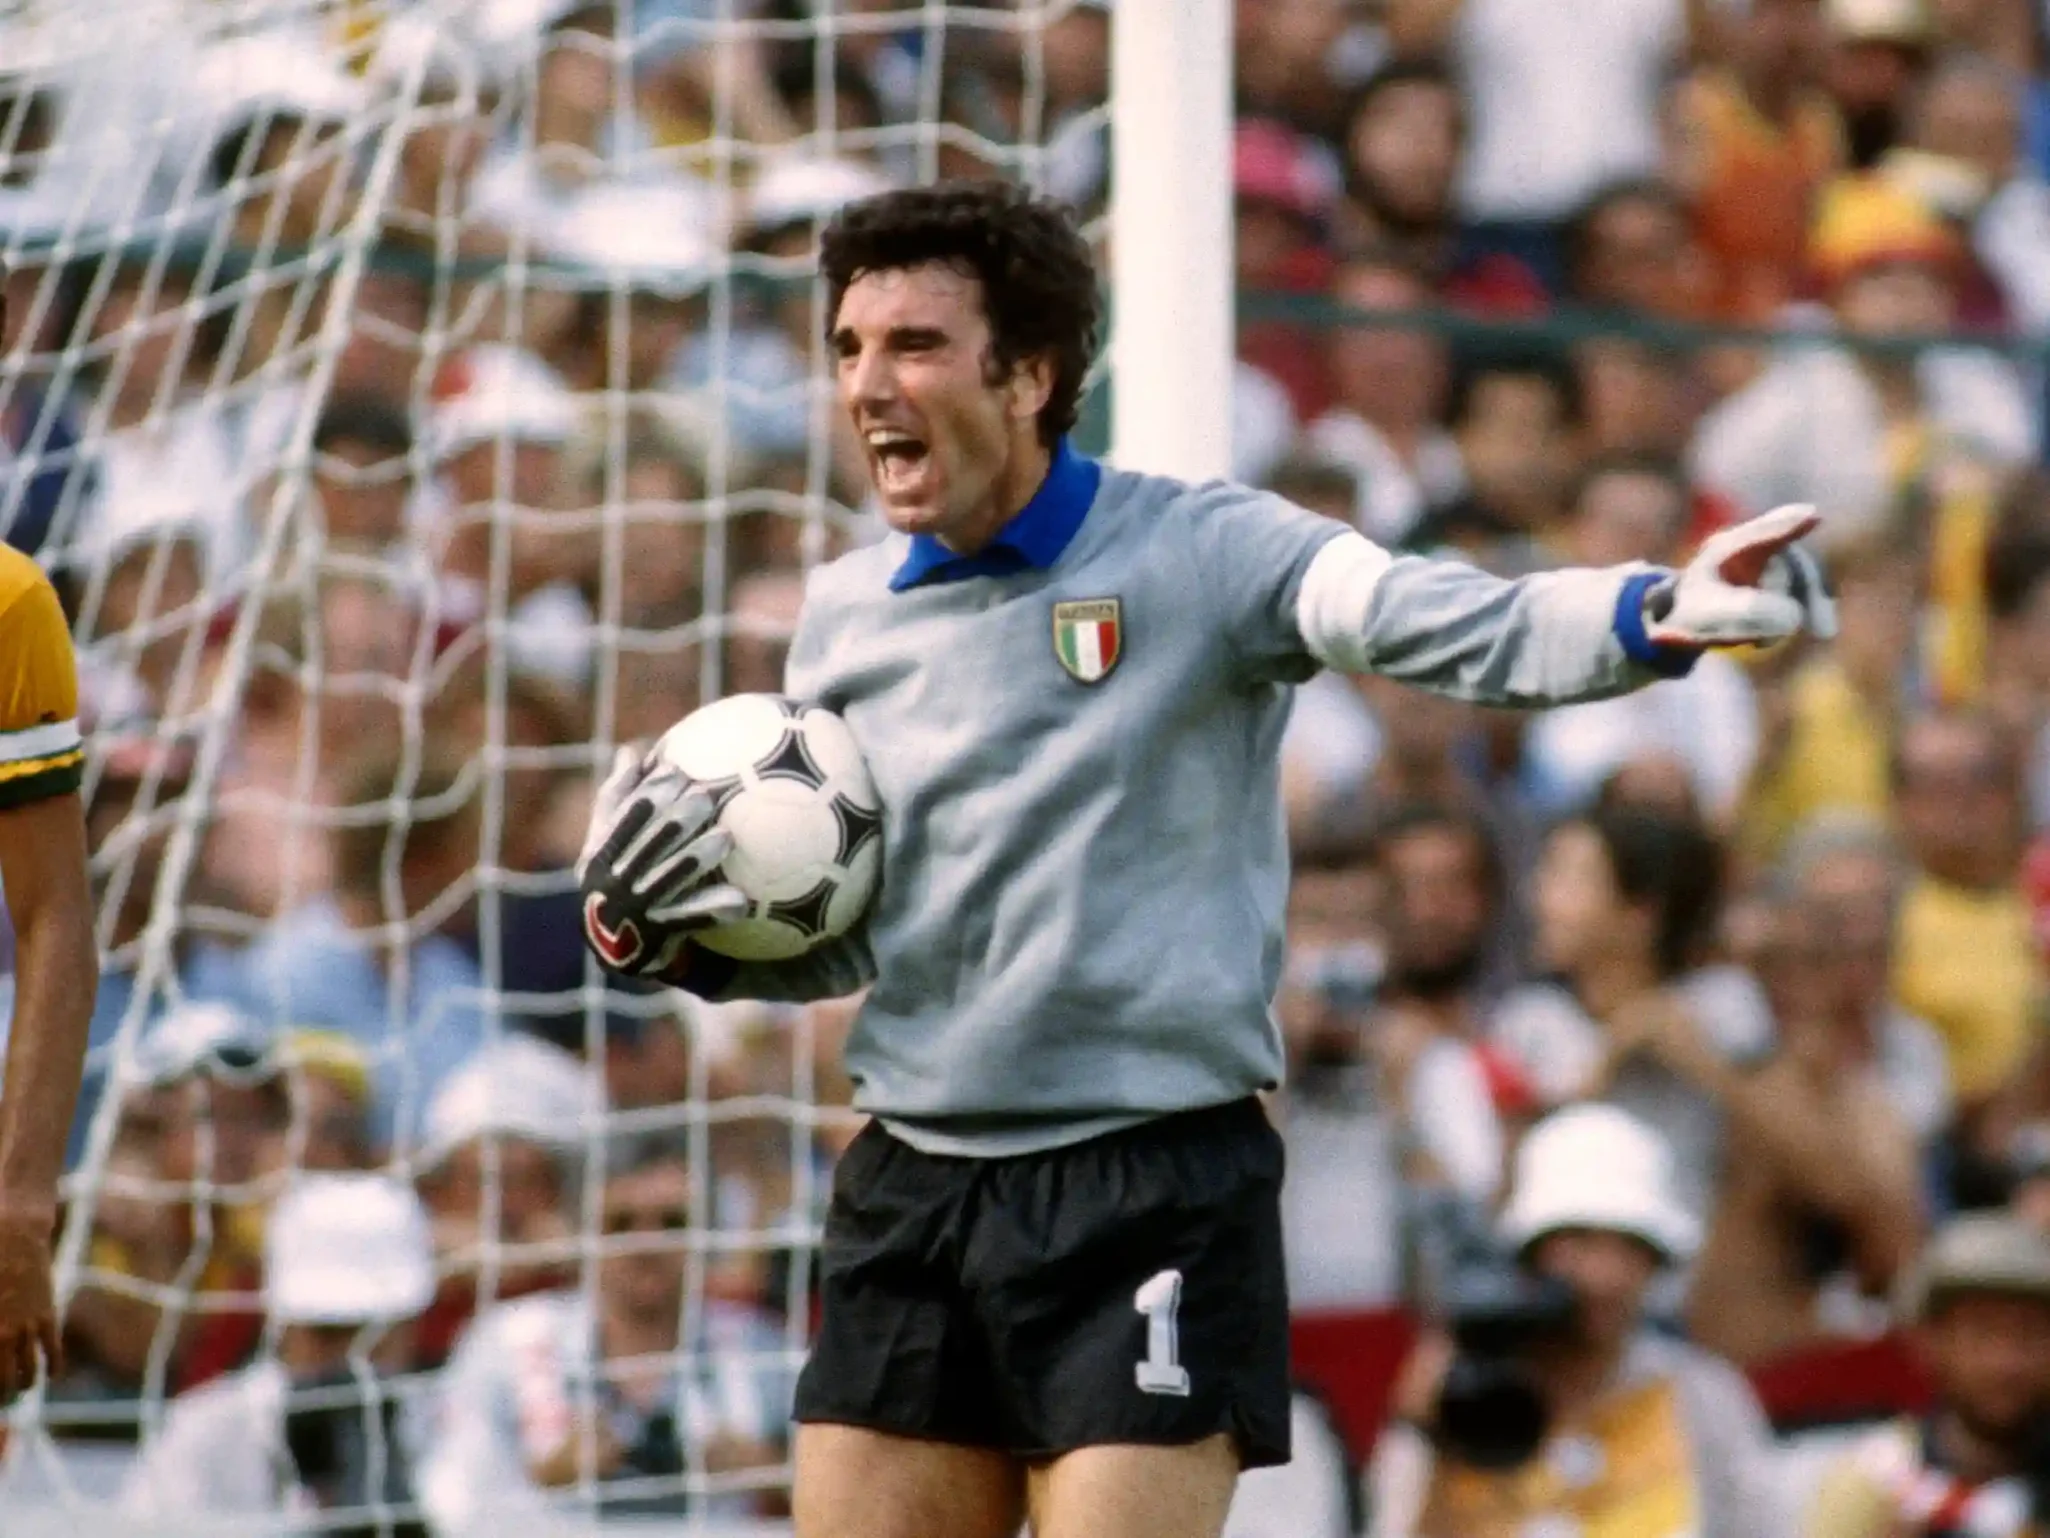 zoff holding the football when in goals for italy